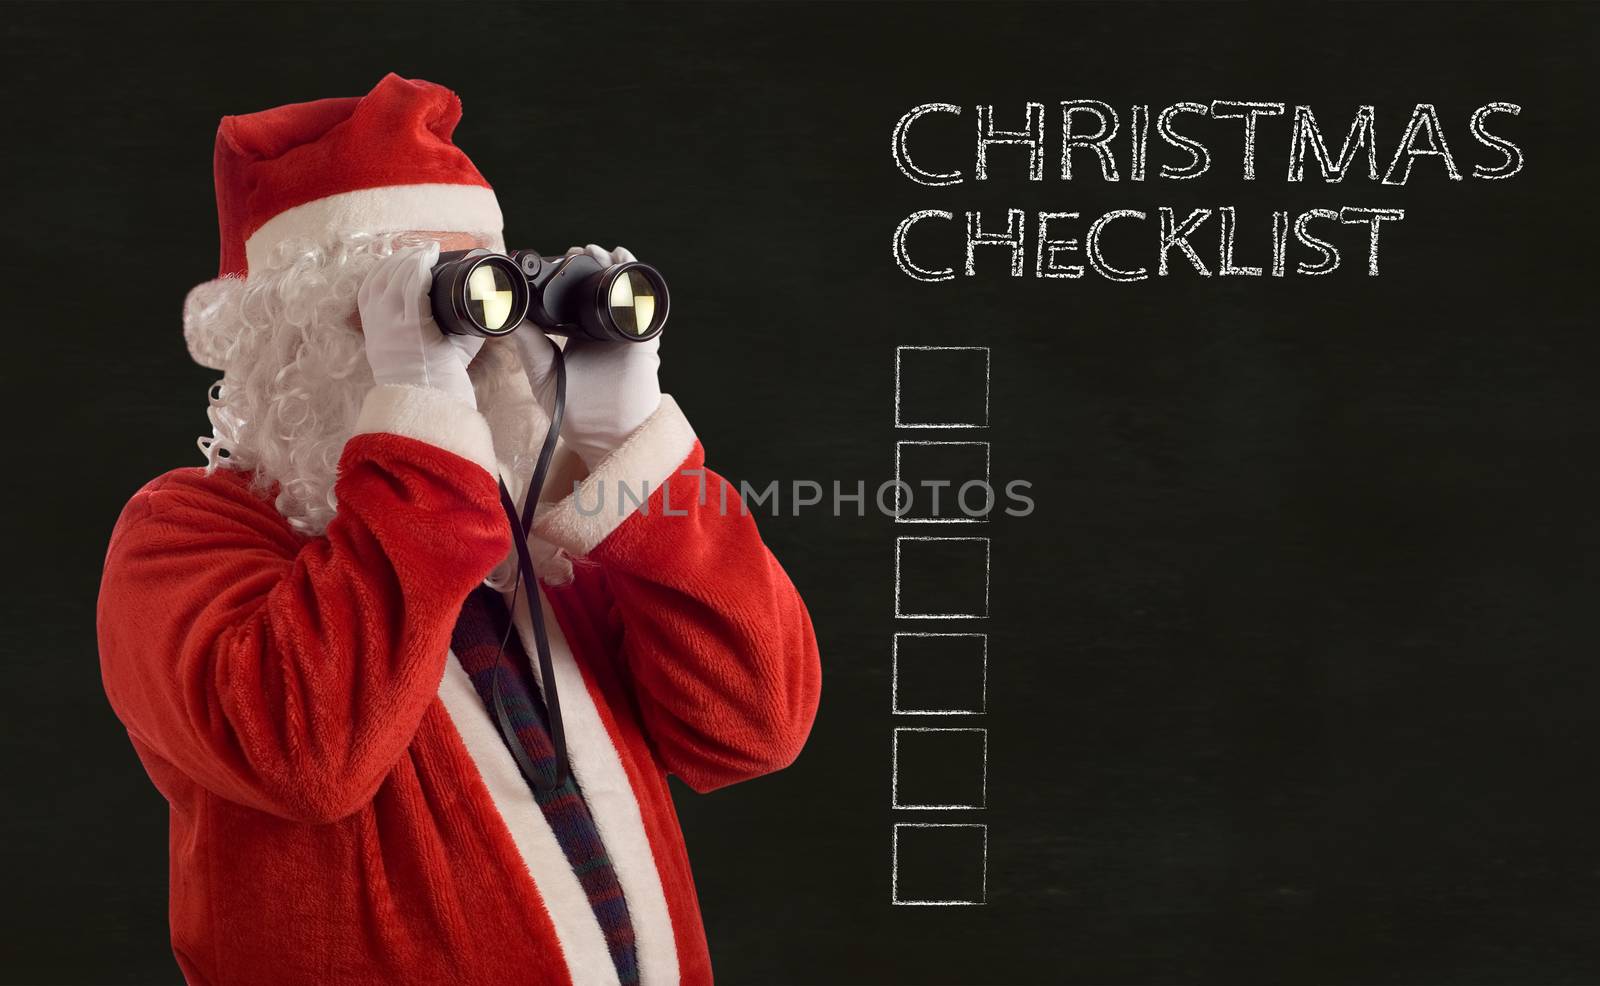 Father Christmas Business Strategy checklist by alistaircotton